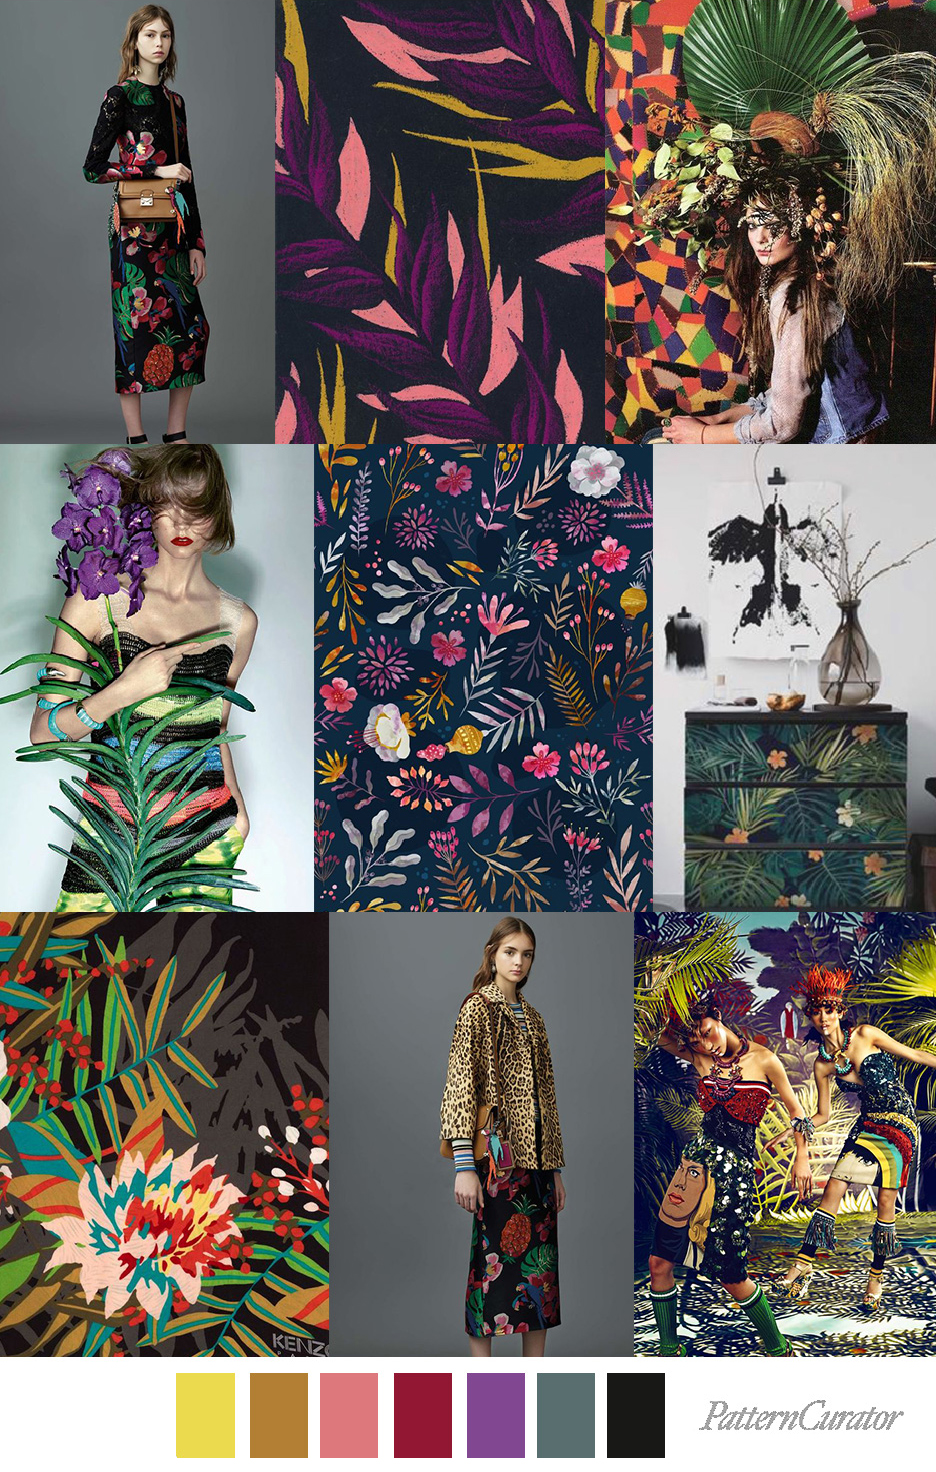 Pattern Curator OBSCURE TROPIC